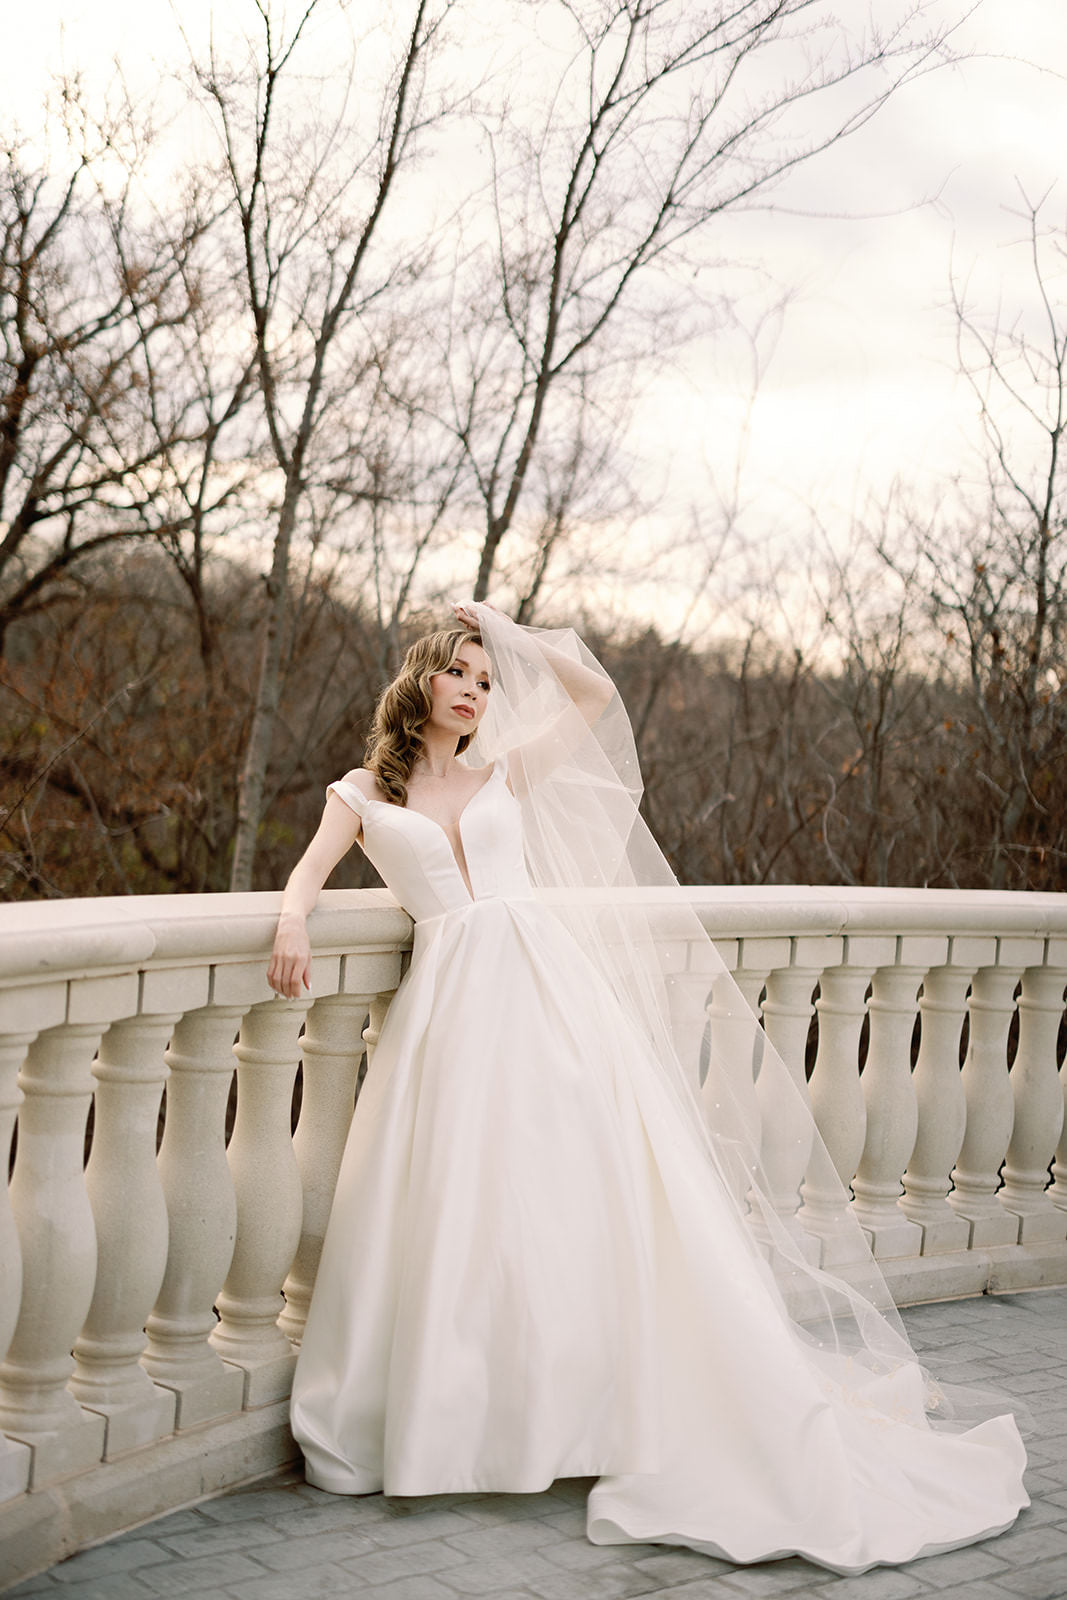 Brides & Hairpins Alora Cathedral Veil with Scattered Pearls Wholesale